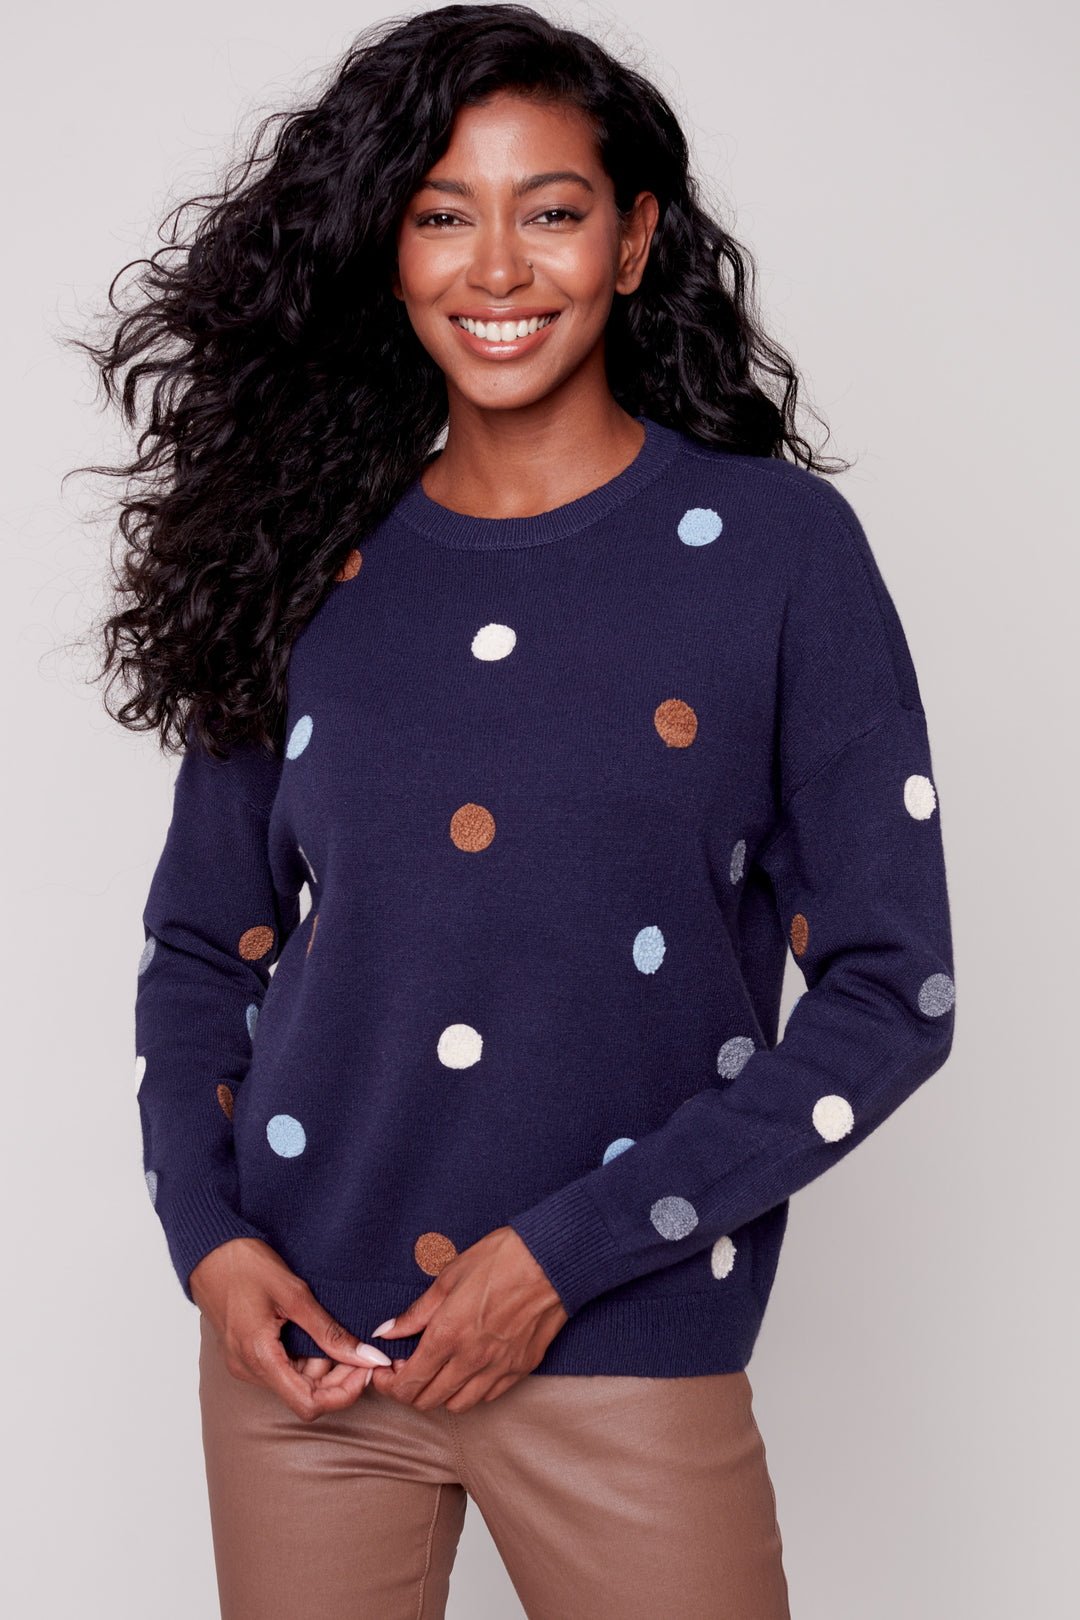 Charlie B Fall 2023 women's casual long sleeve crew neck polka dot light pullover sweater- Navy front